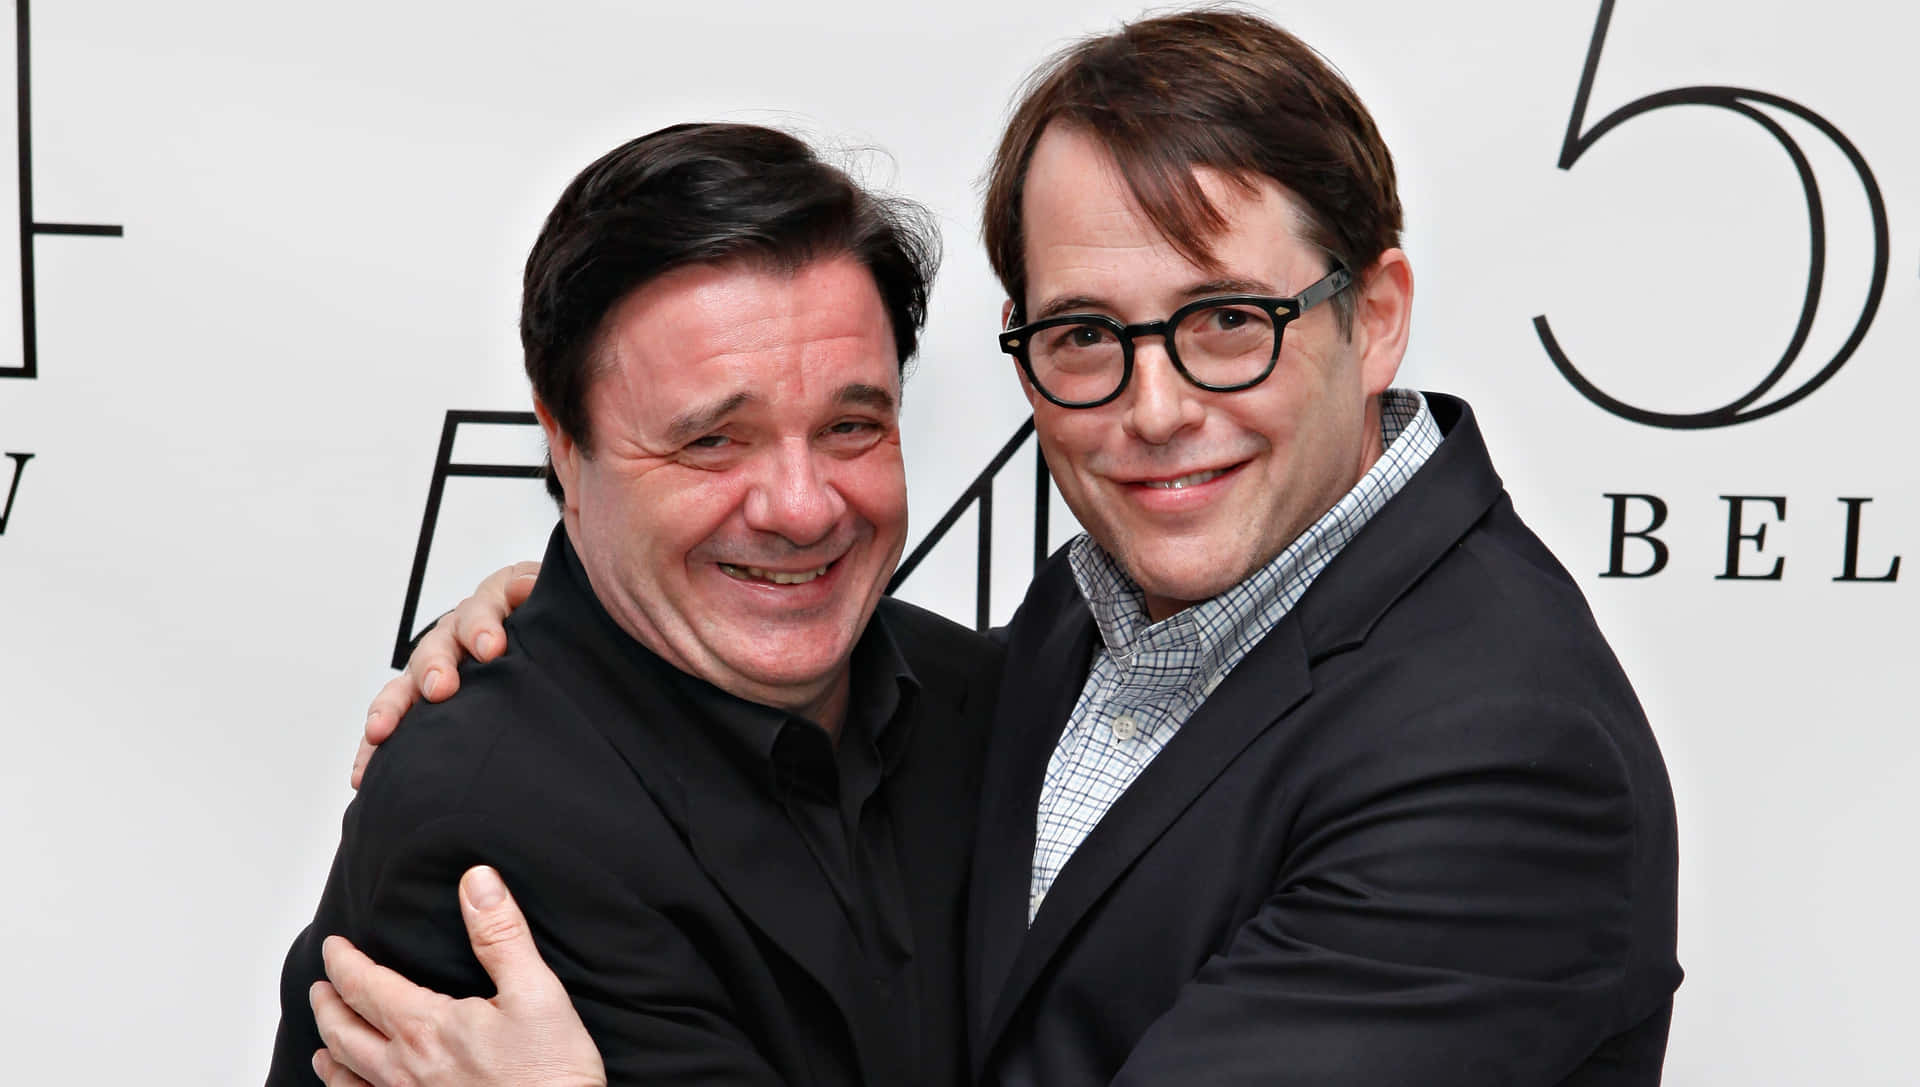 Actornathan Lane, Known For His Roles In The Birdcage And The Lion King, Will Be Featured On Your Computer Or Mobile Wallpaper. Slash Off Any Dull Background And Adorn Your Screen With This Vibrant Image. A Perfect Choice For All Nathan Lane Aficionados! Fondo de pantalla